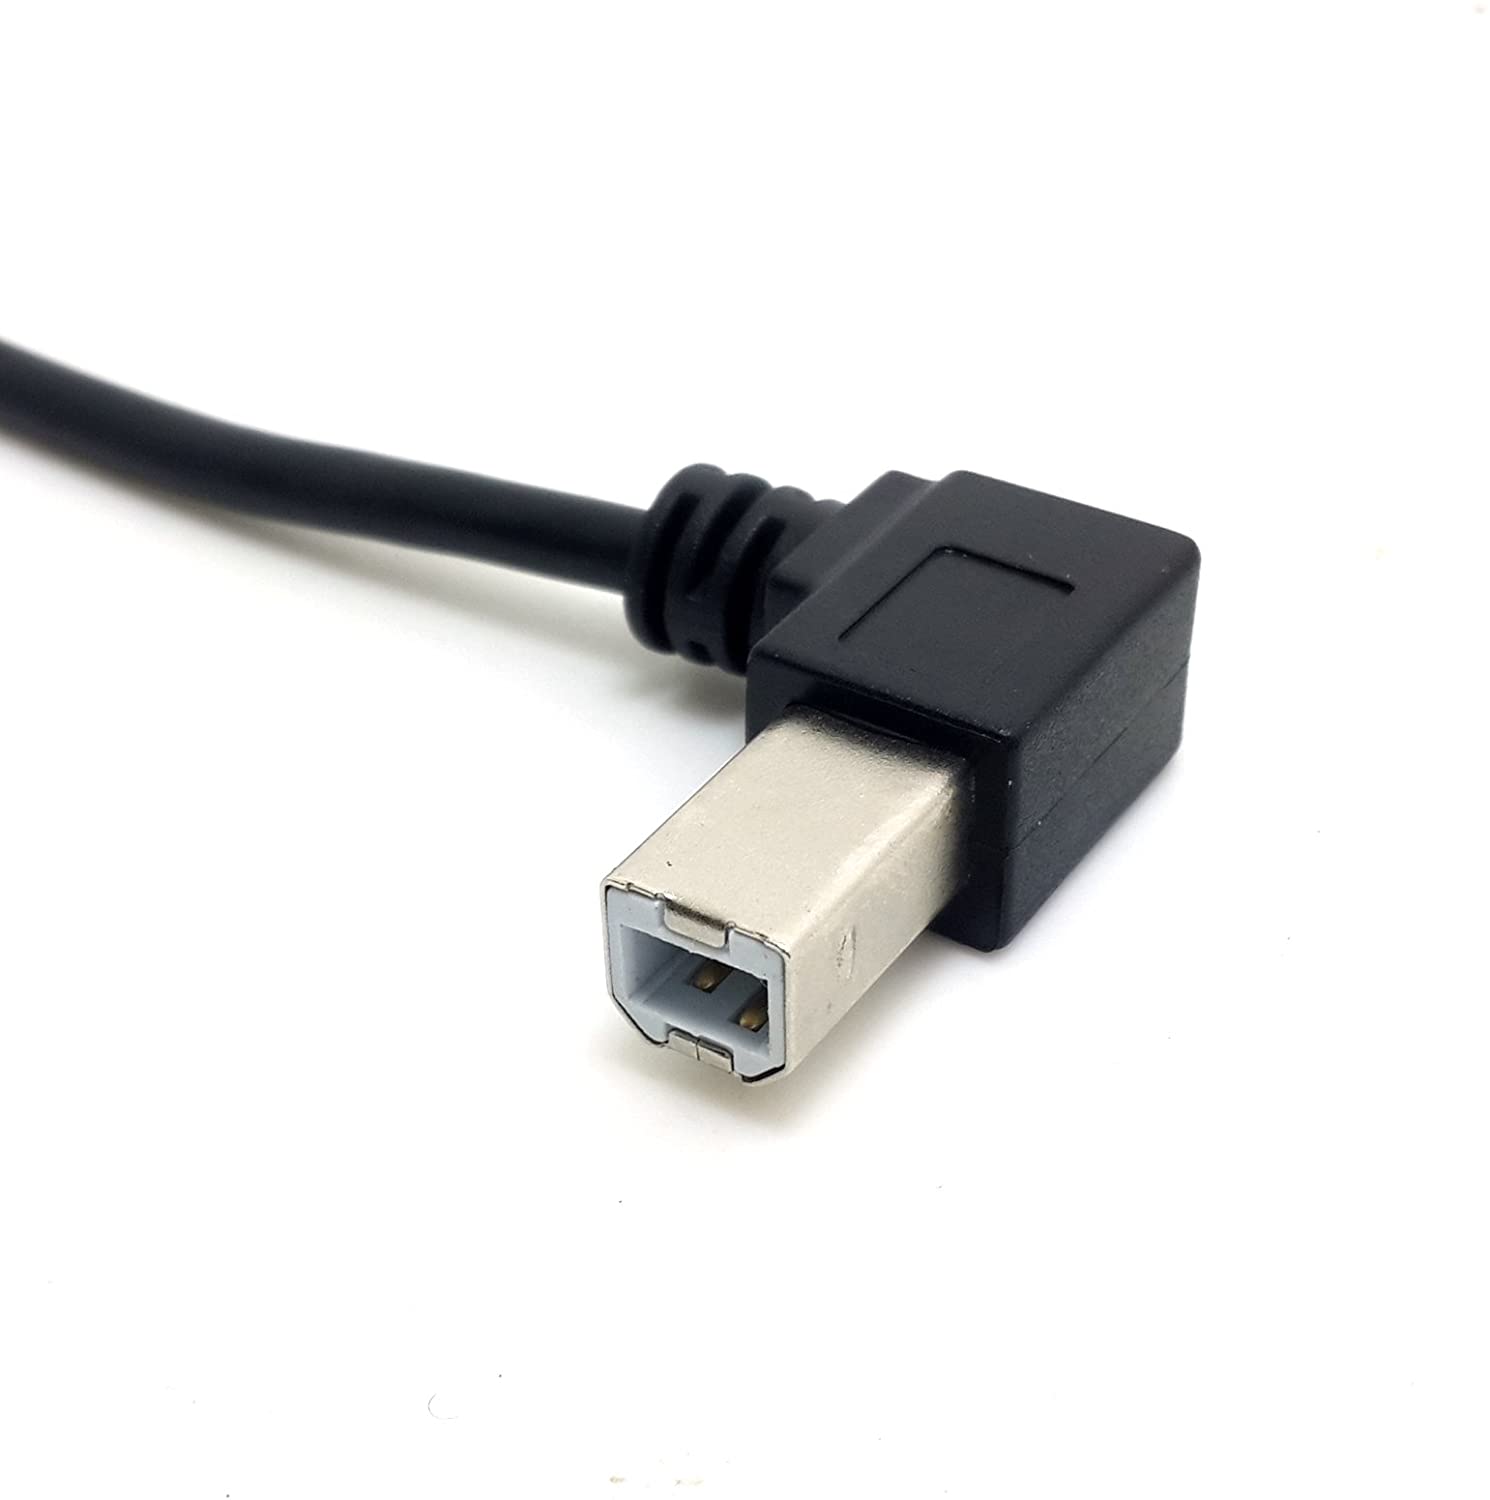 USB-A 2.0 Left Angle Male to USB-B 2.0 Right Angle Male Printer Cable 0.5m